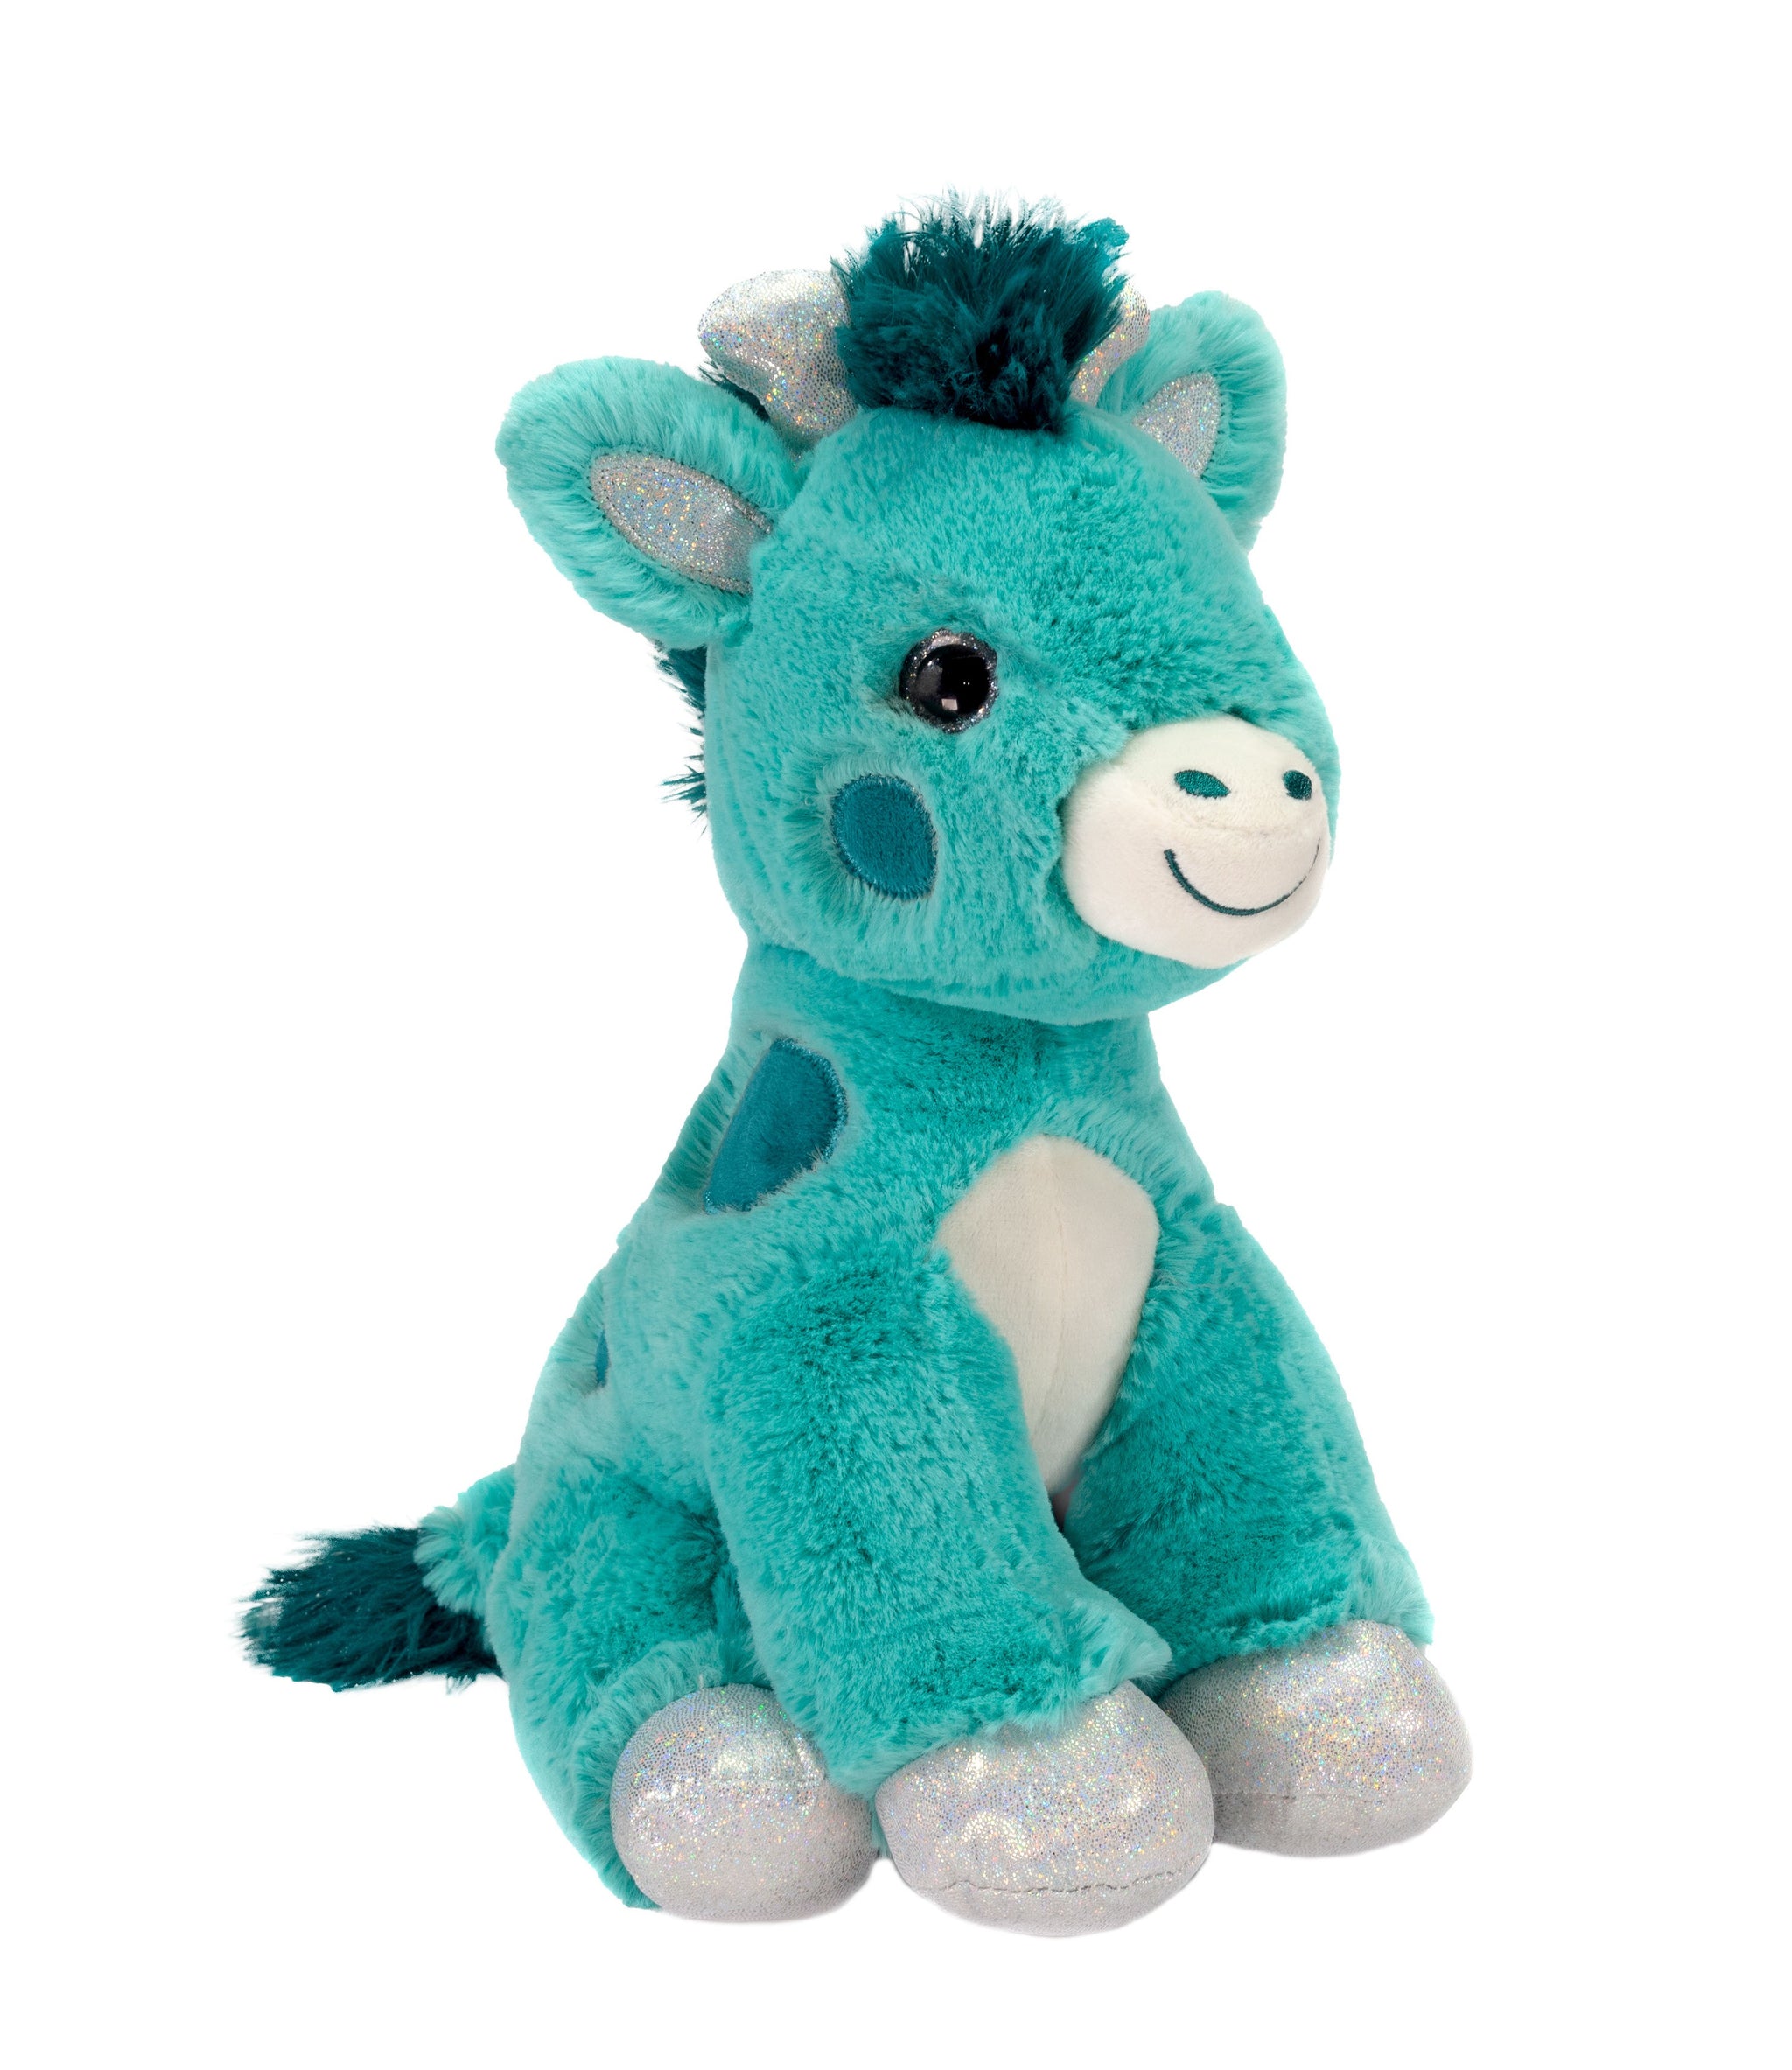 COTTON CANDY CUTIES - 10.5IN GIRAFFES PINK OR TURQUOISE - Fiesta Toy